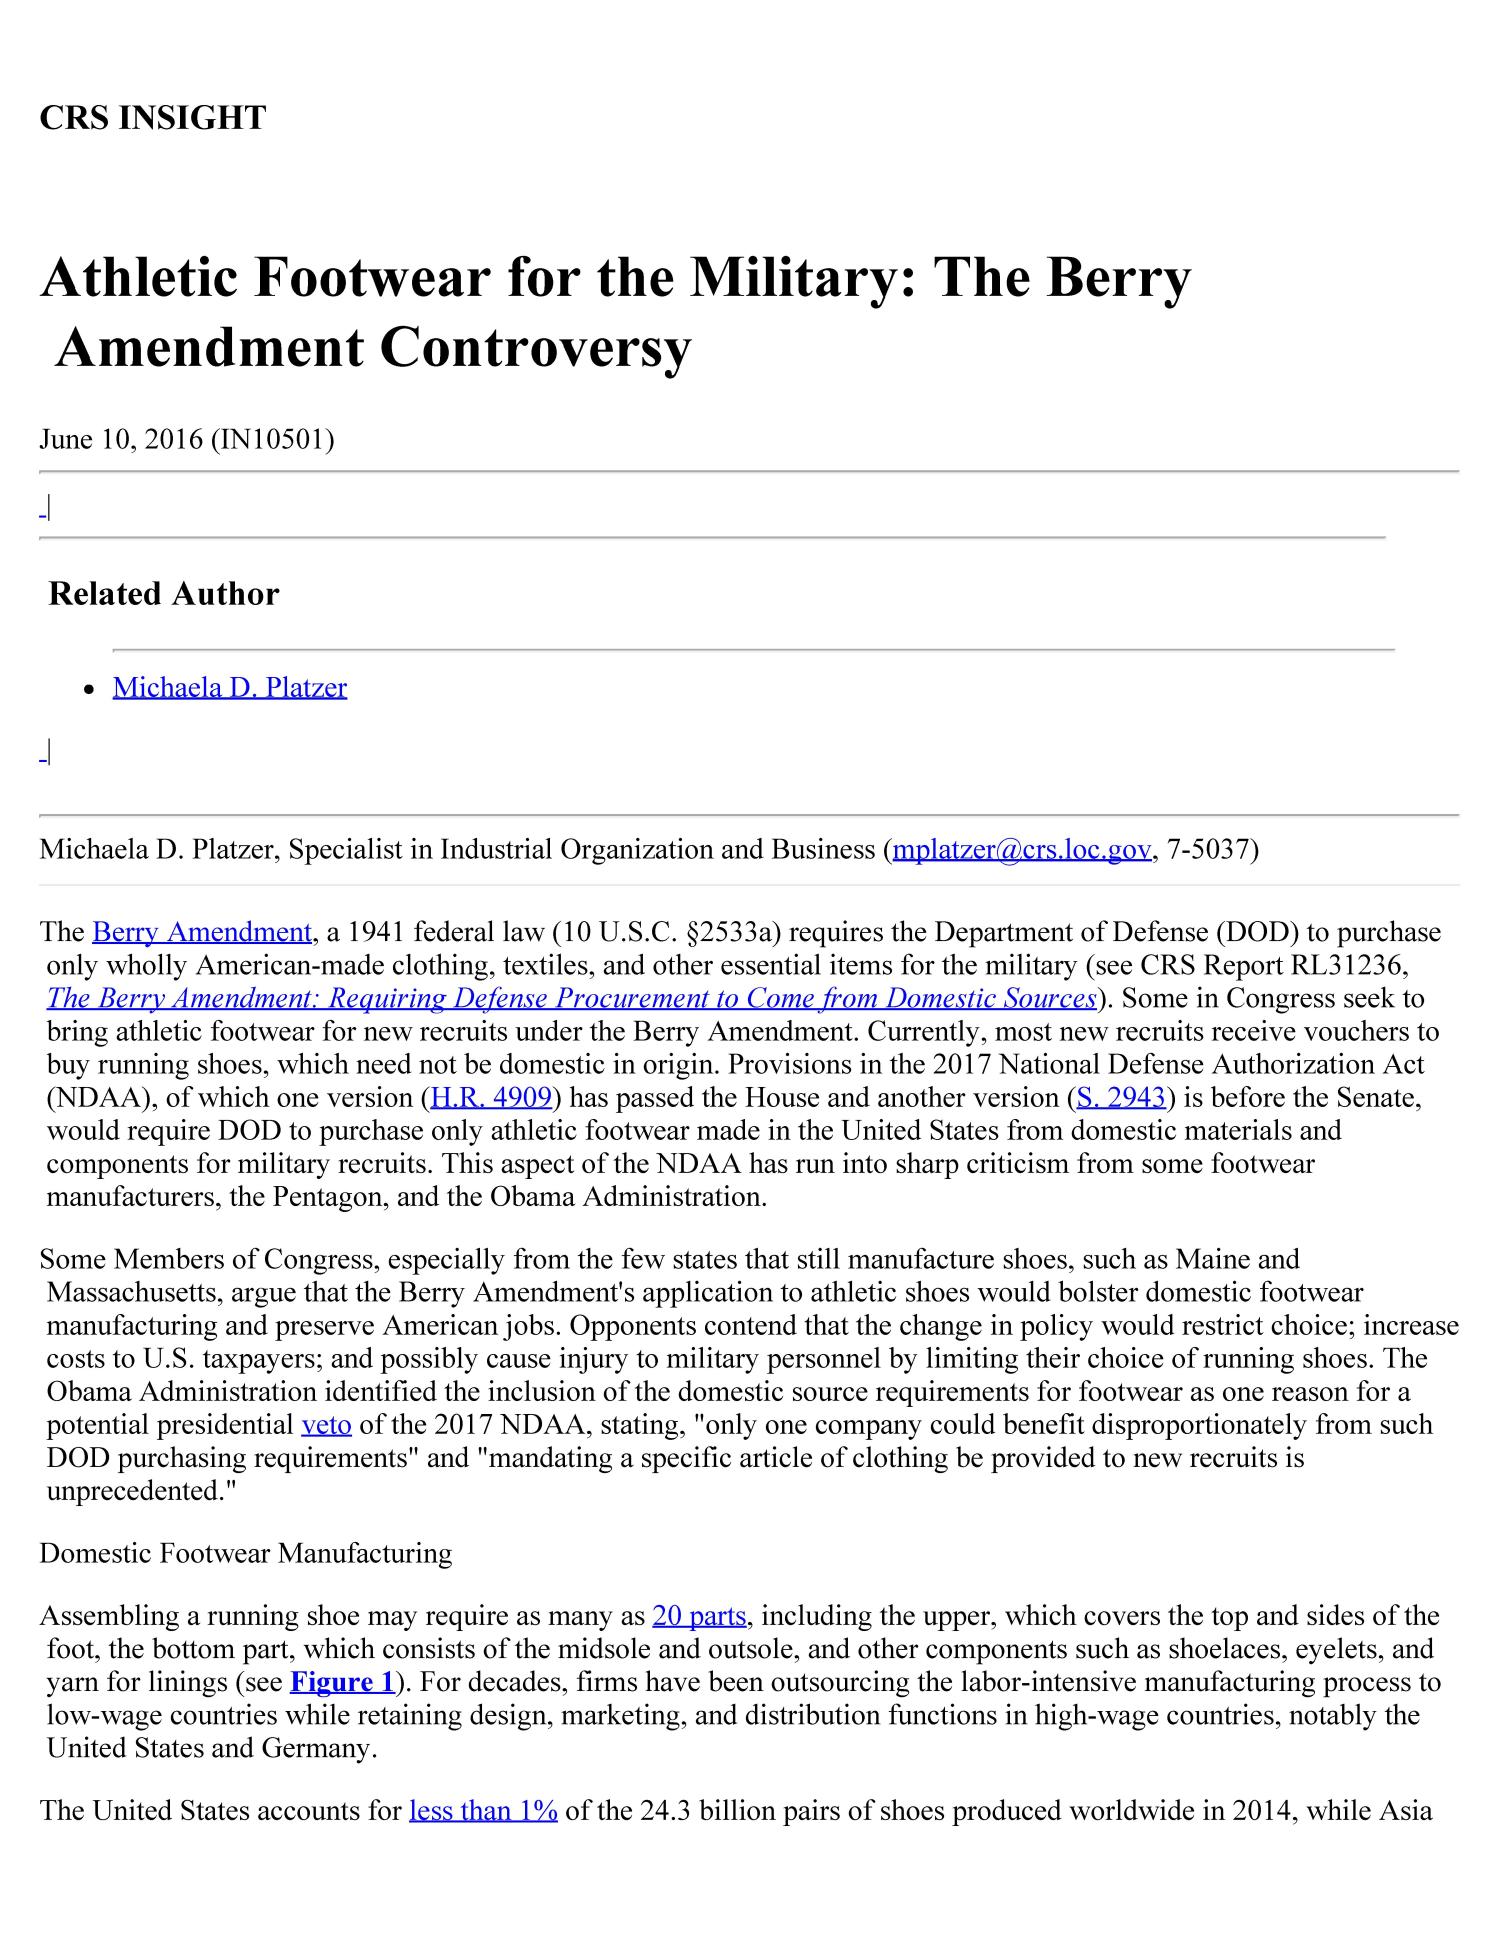 Athletic Footwear for the Military: The Berry Amendment Controversy
                                                
                                                    [Sequence #]: 1 of 3
                                                